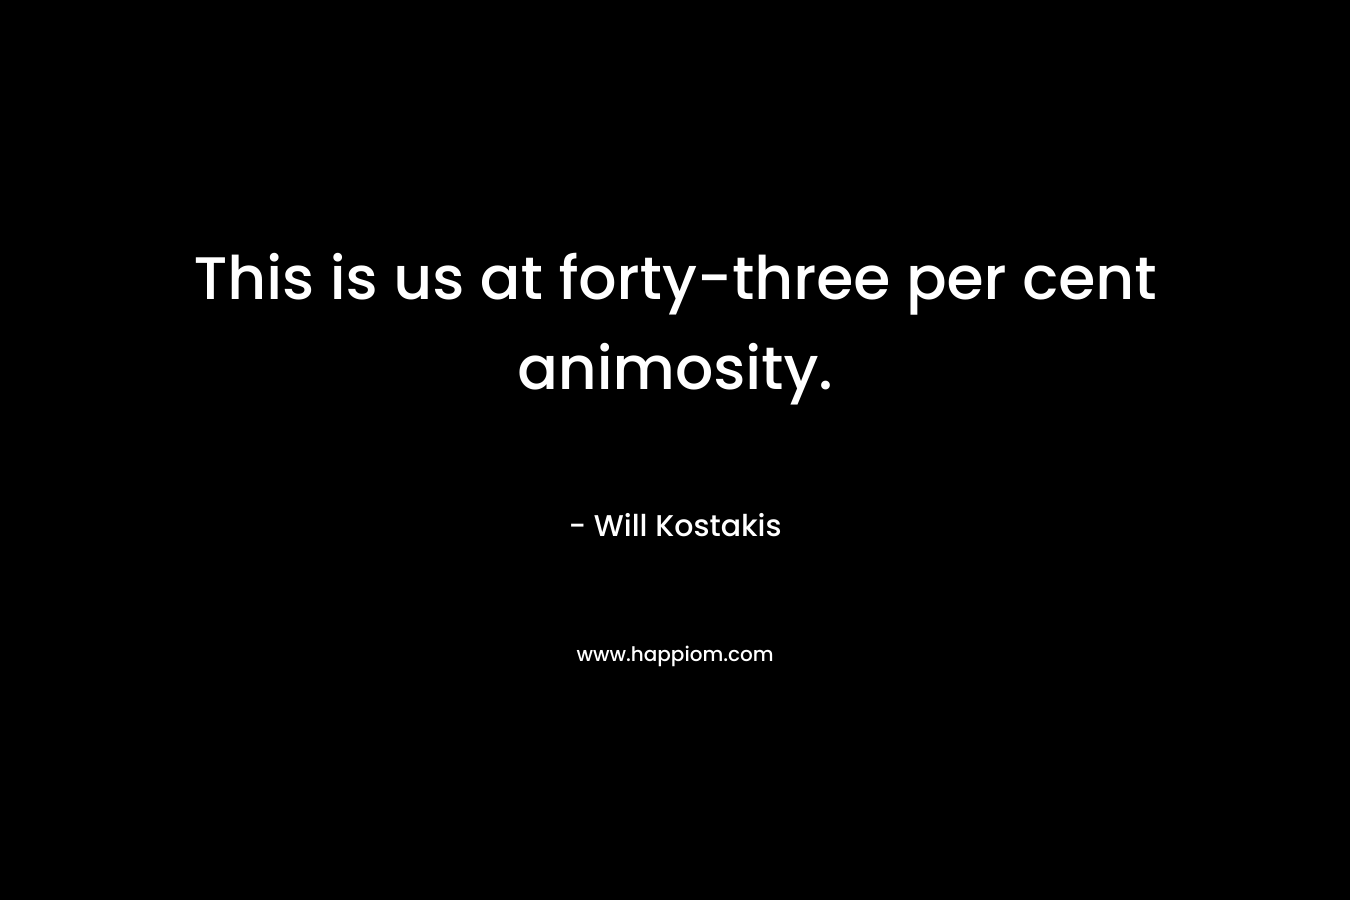 This is us at forty-three per cent animosity. – Will Kostakis